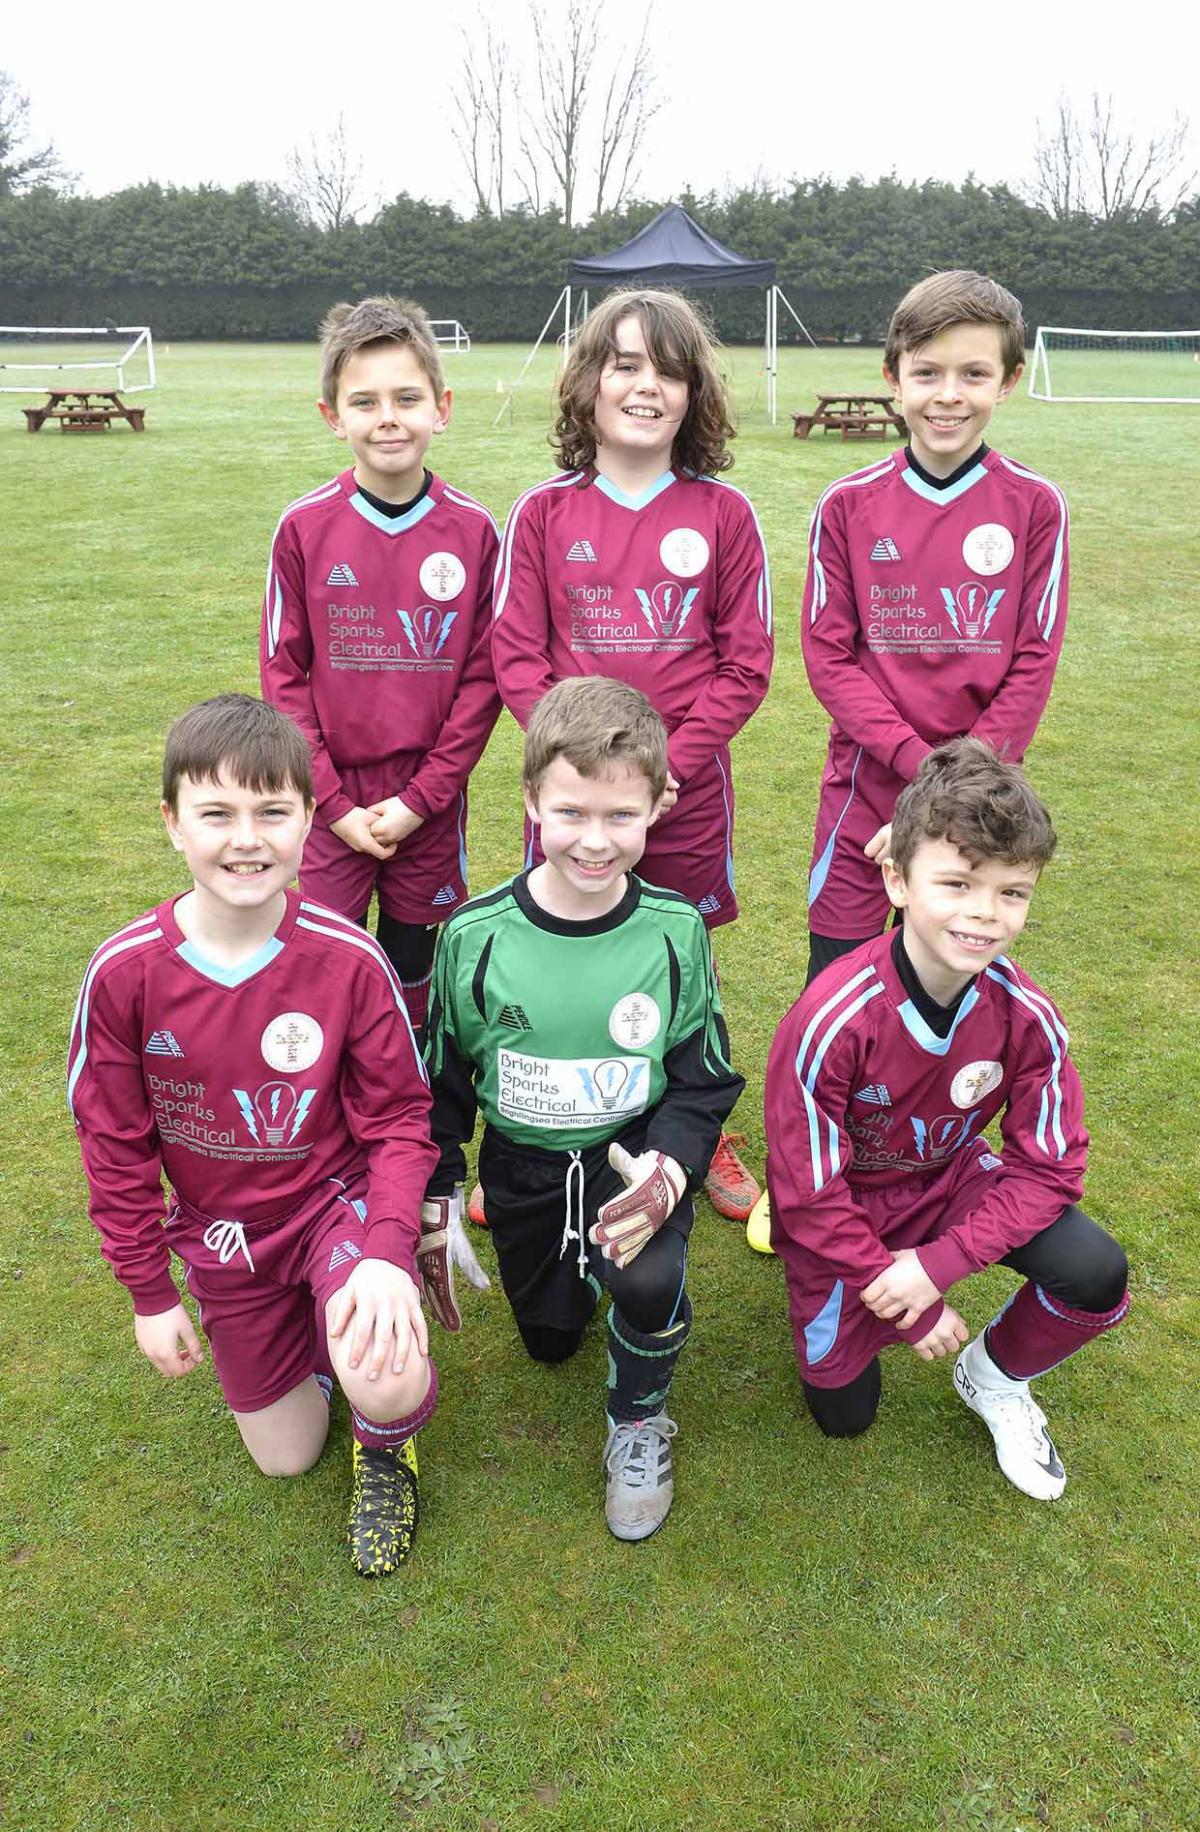 Primary school's 5 a side football tournament  at Ardleigh